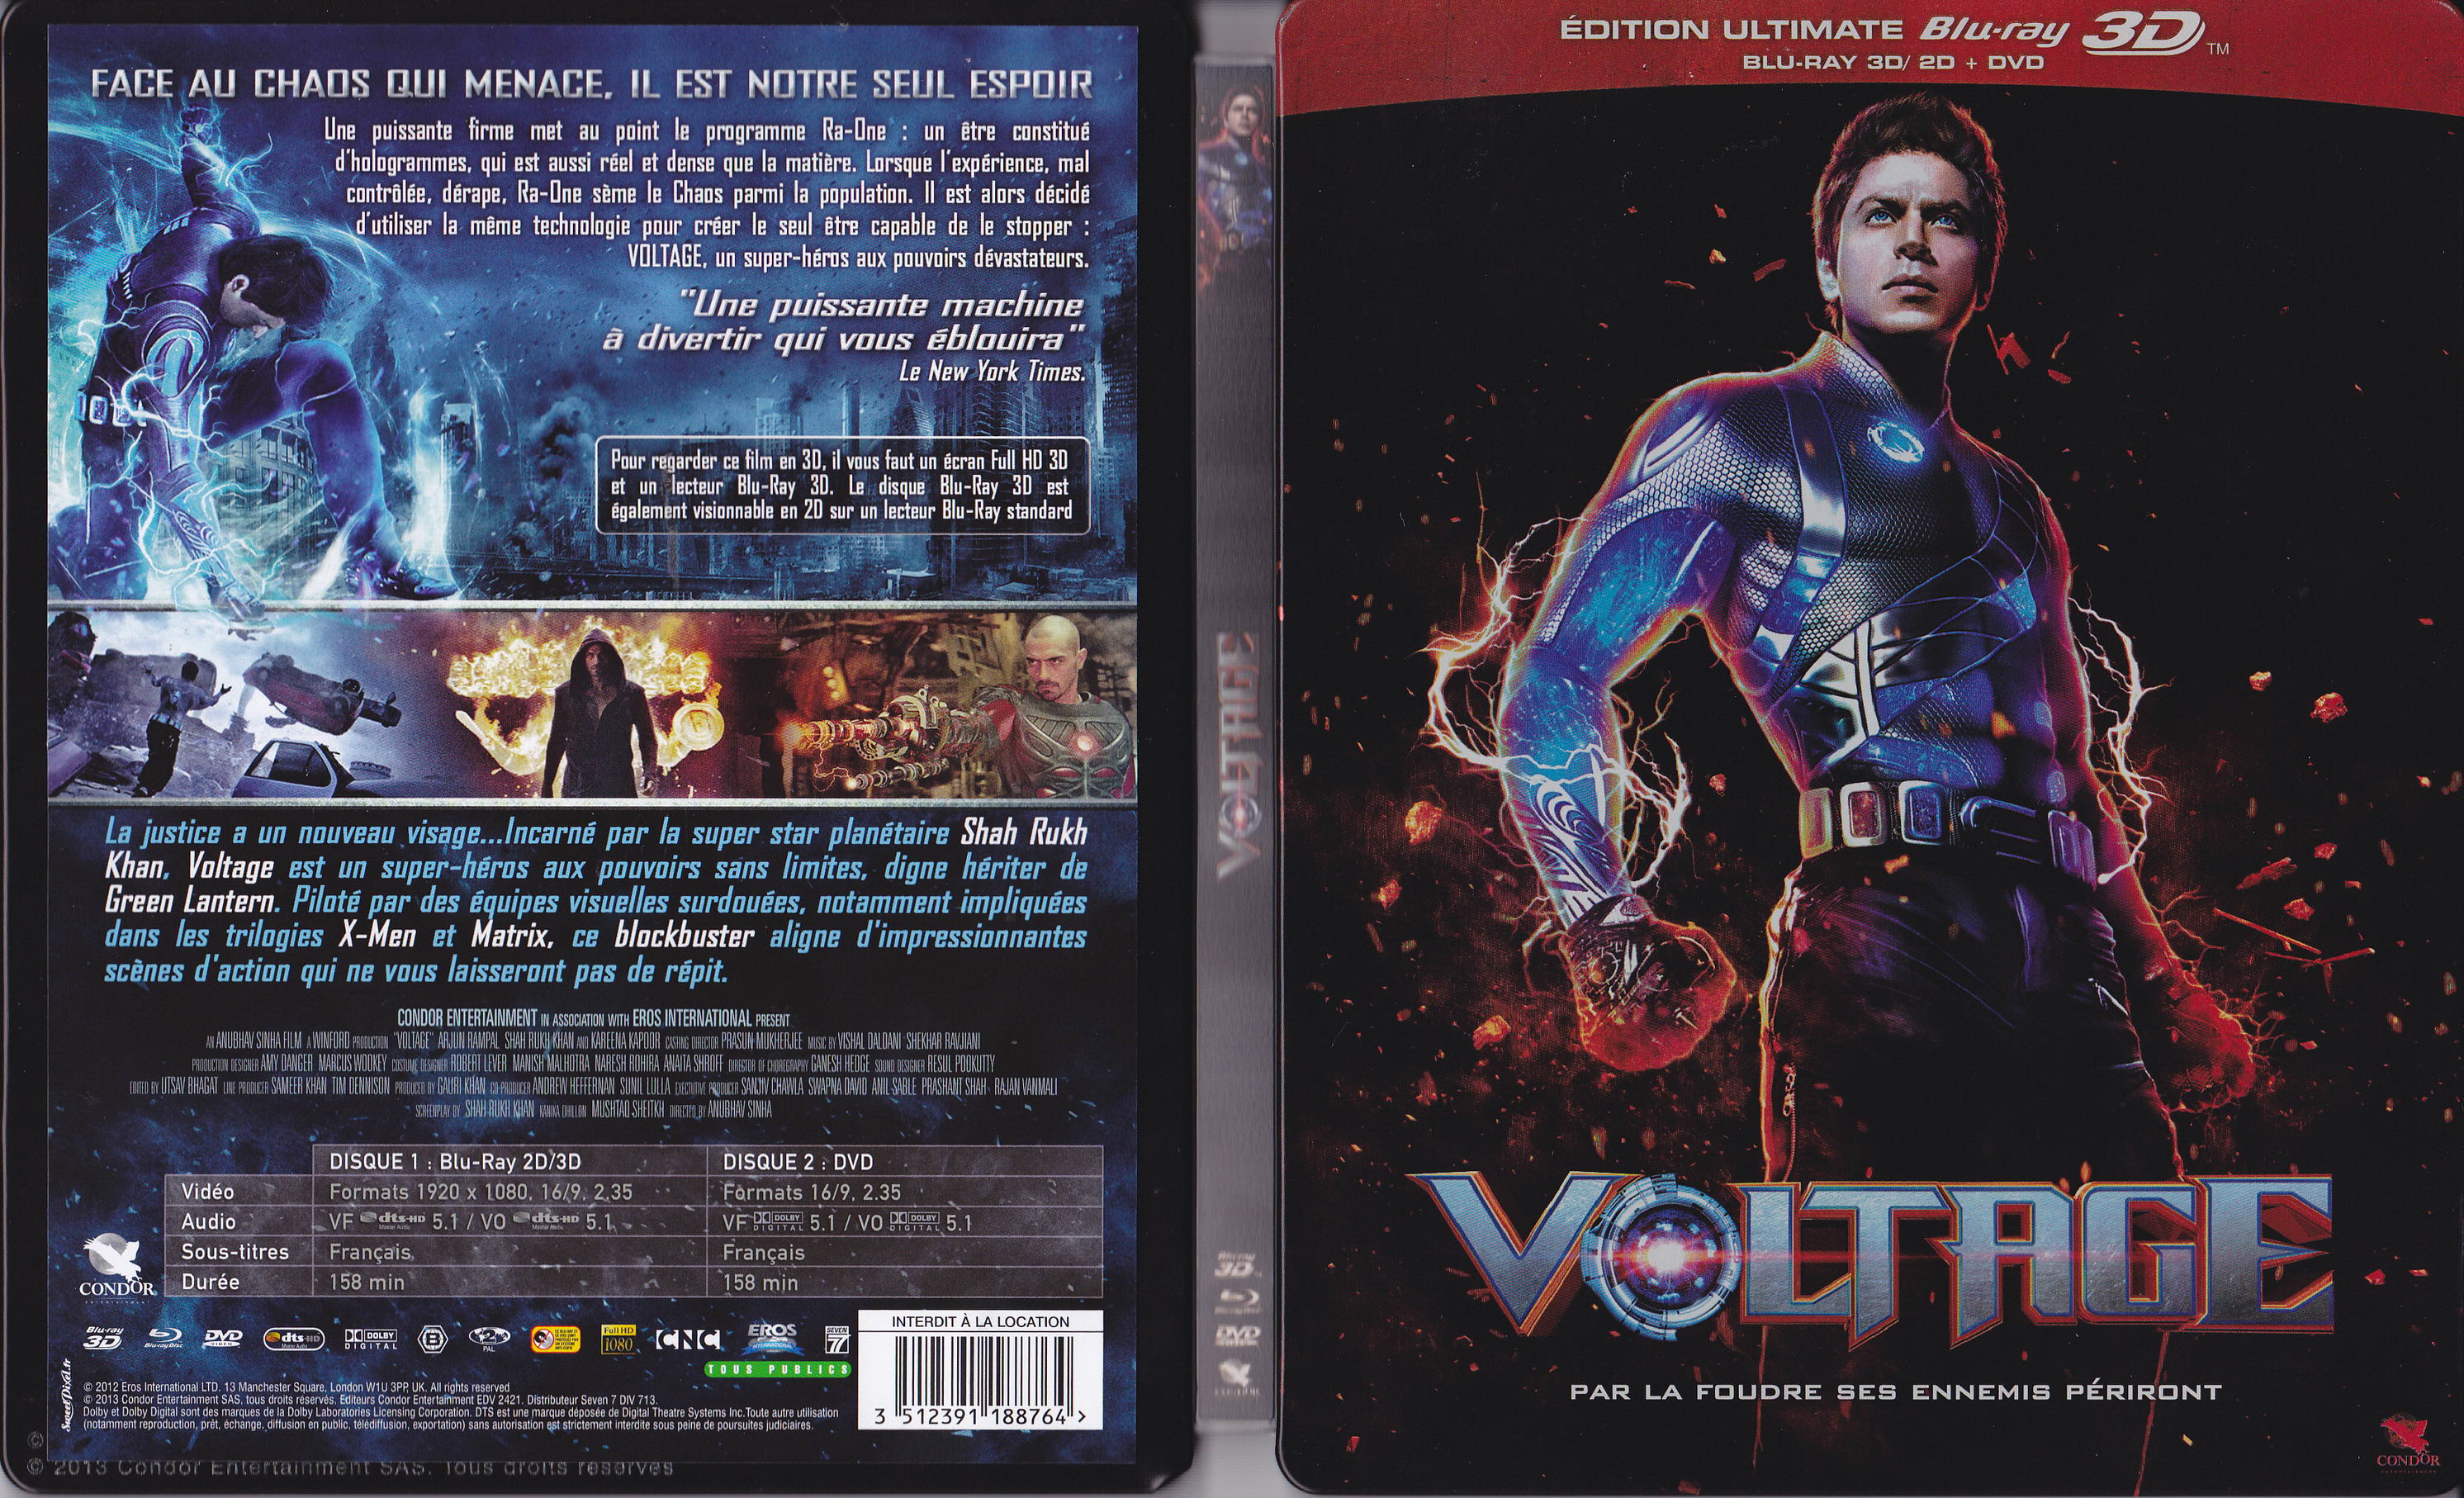 Jaquette DVD Voltage 3D (BLU-RAY)